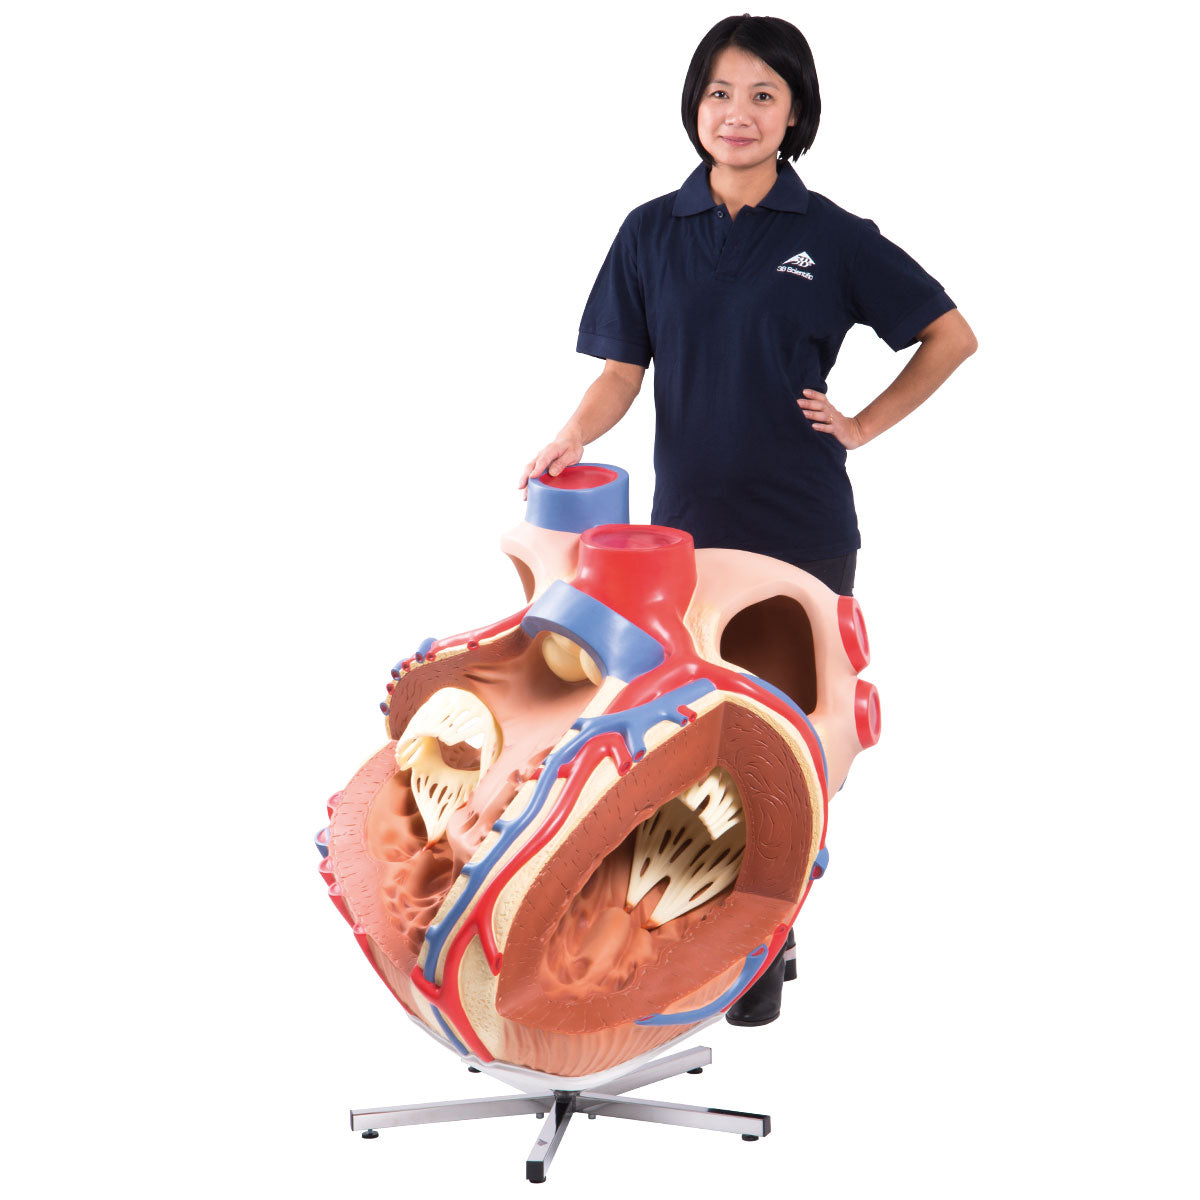 VD250 Giant Heart, 8 Times Life Size